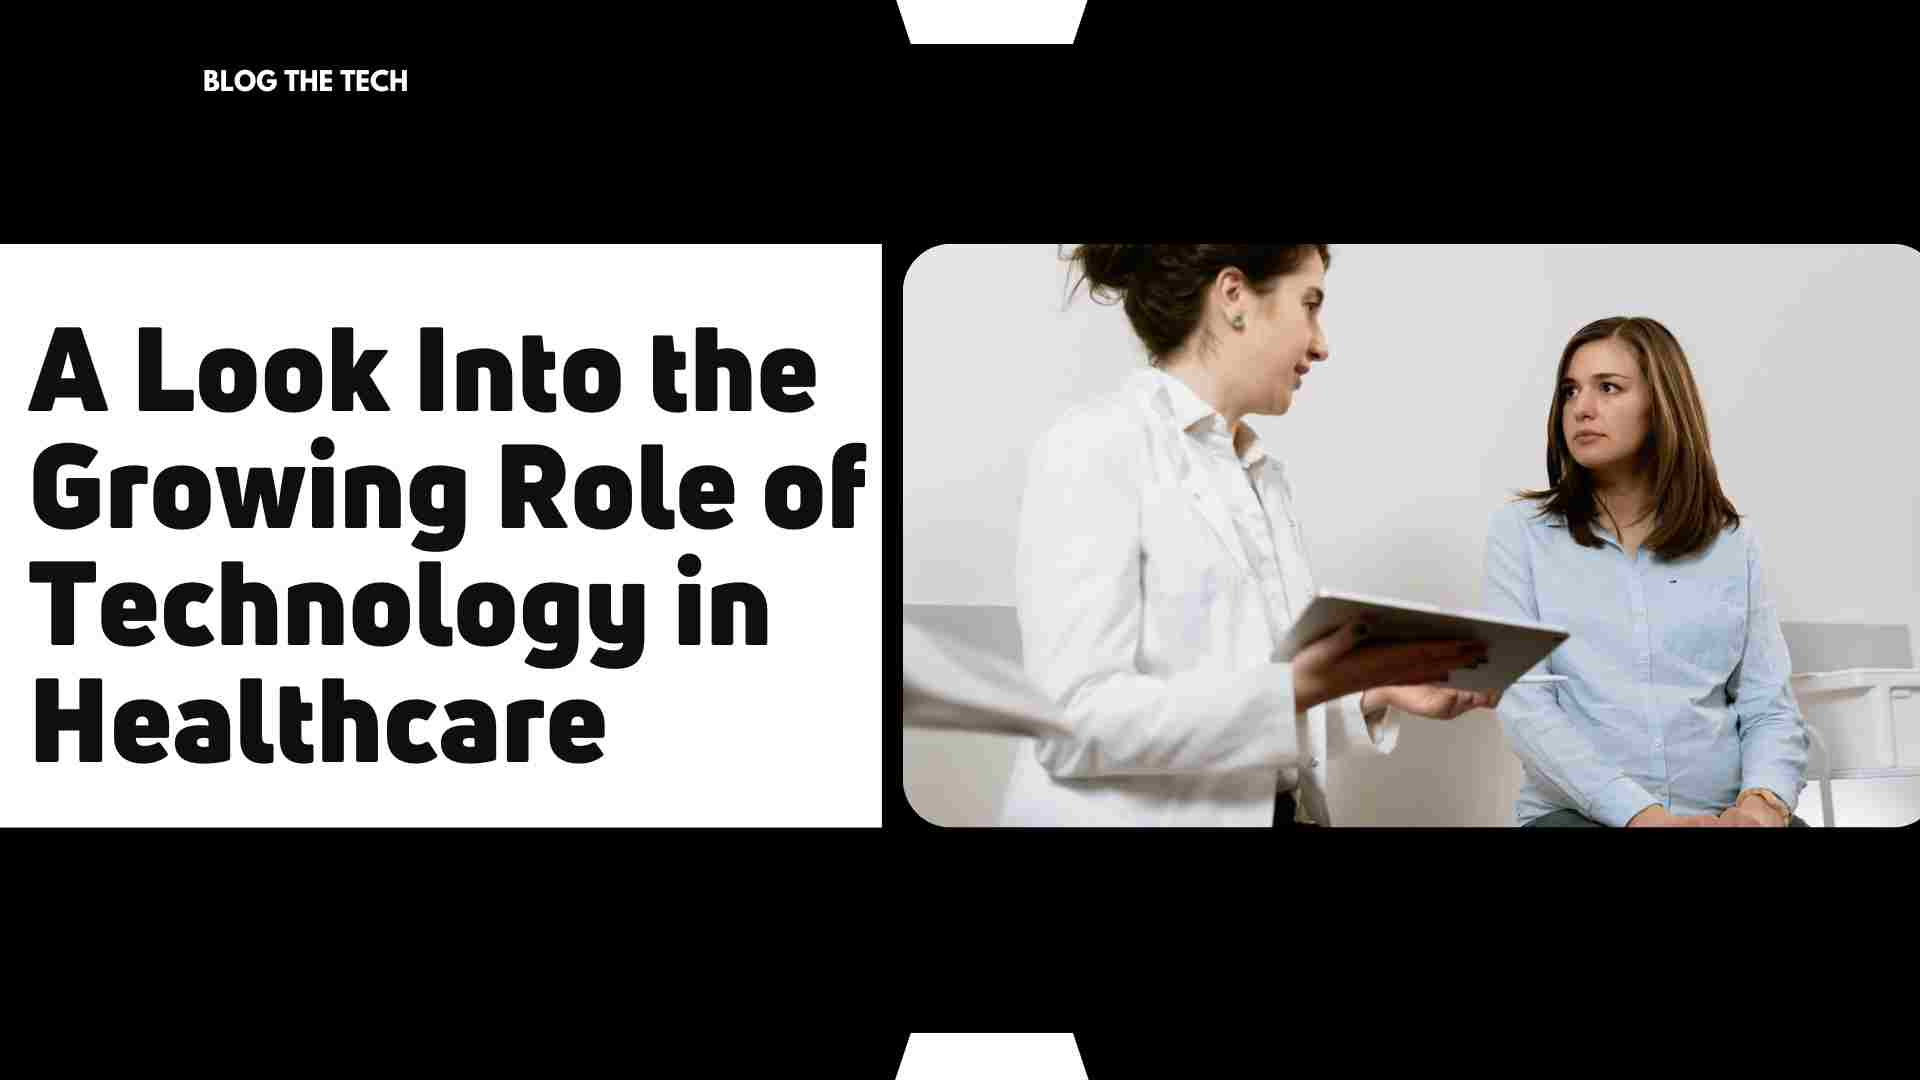 A Look Into the Growing Role of Technology in Healthcare